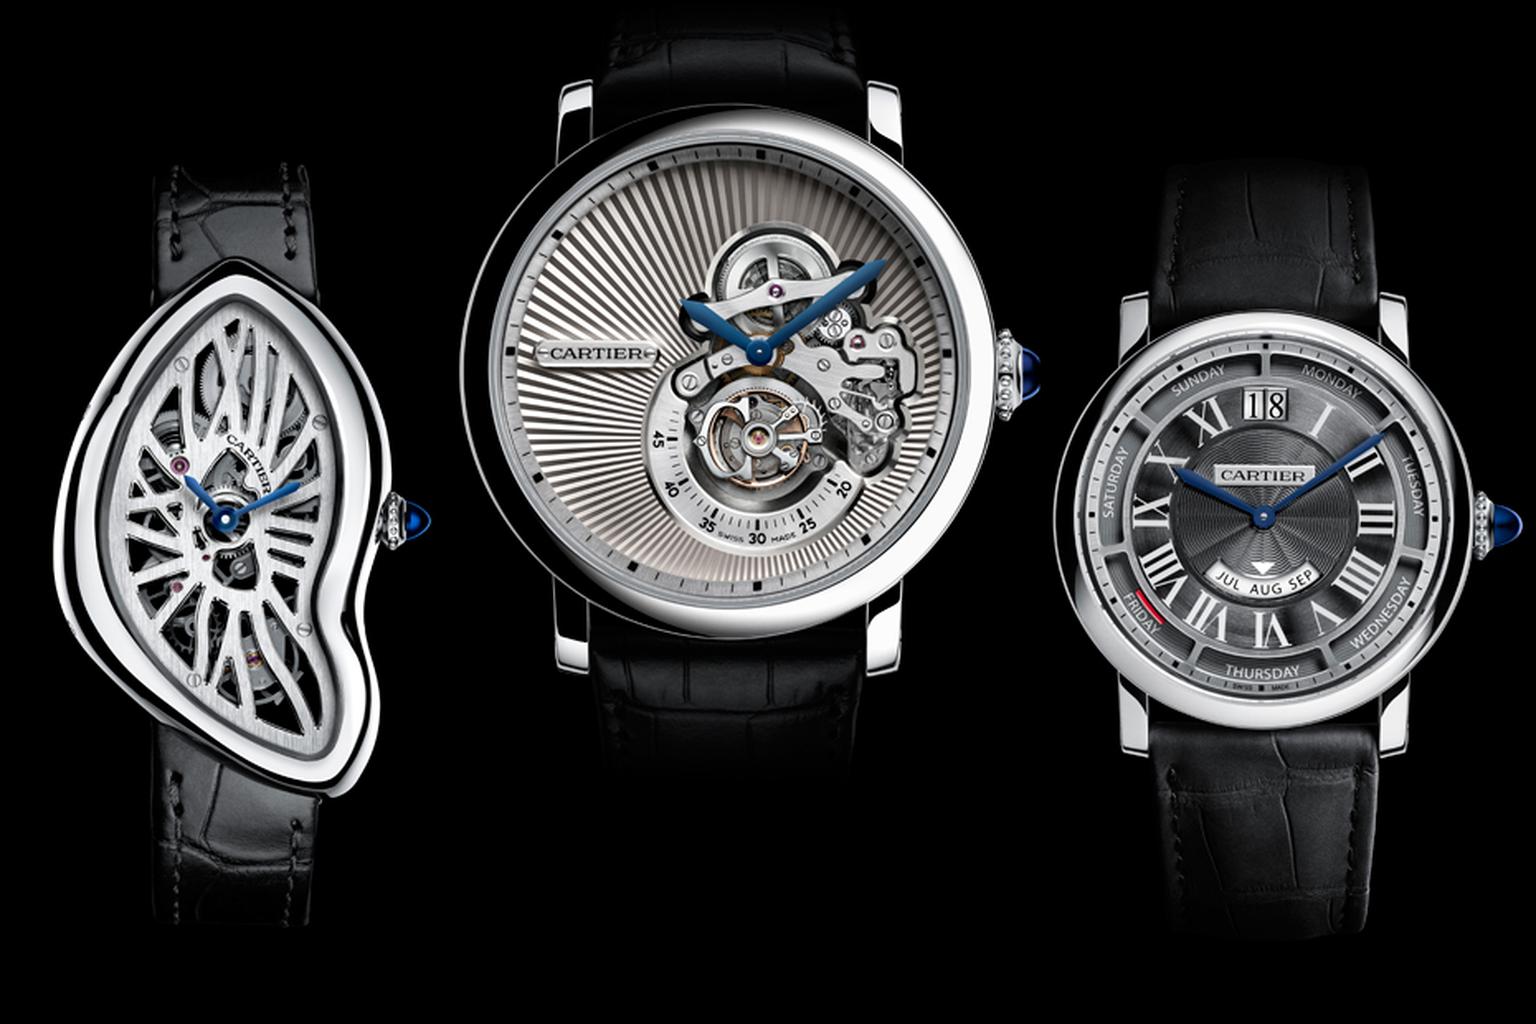 Just two weeks’ before the SIHH 2015 gets underway, Cartier watches shows the world how far it has come in the high horology game with a naked revision of its iconic Cartier Crash watch, an artistic rendition of the Rotonde de Cartier Reversed Tourbillon 